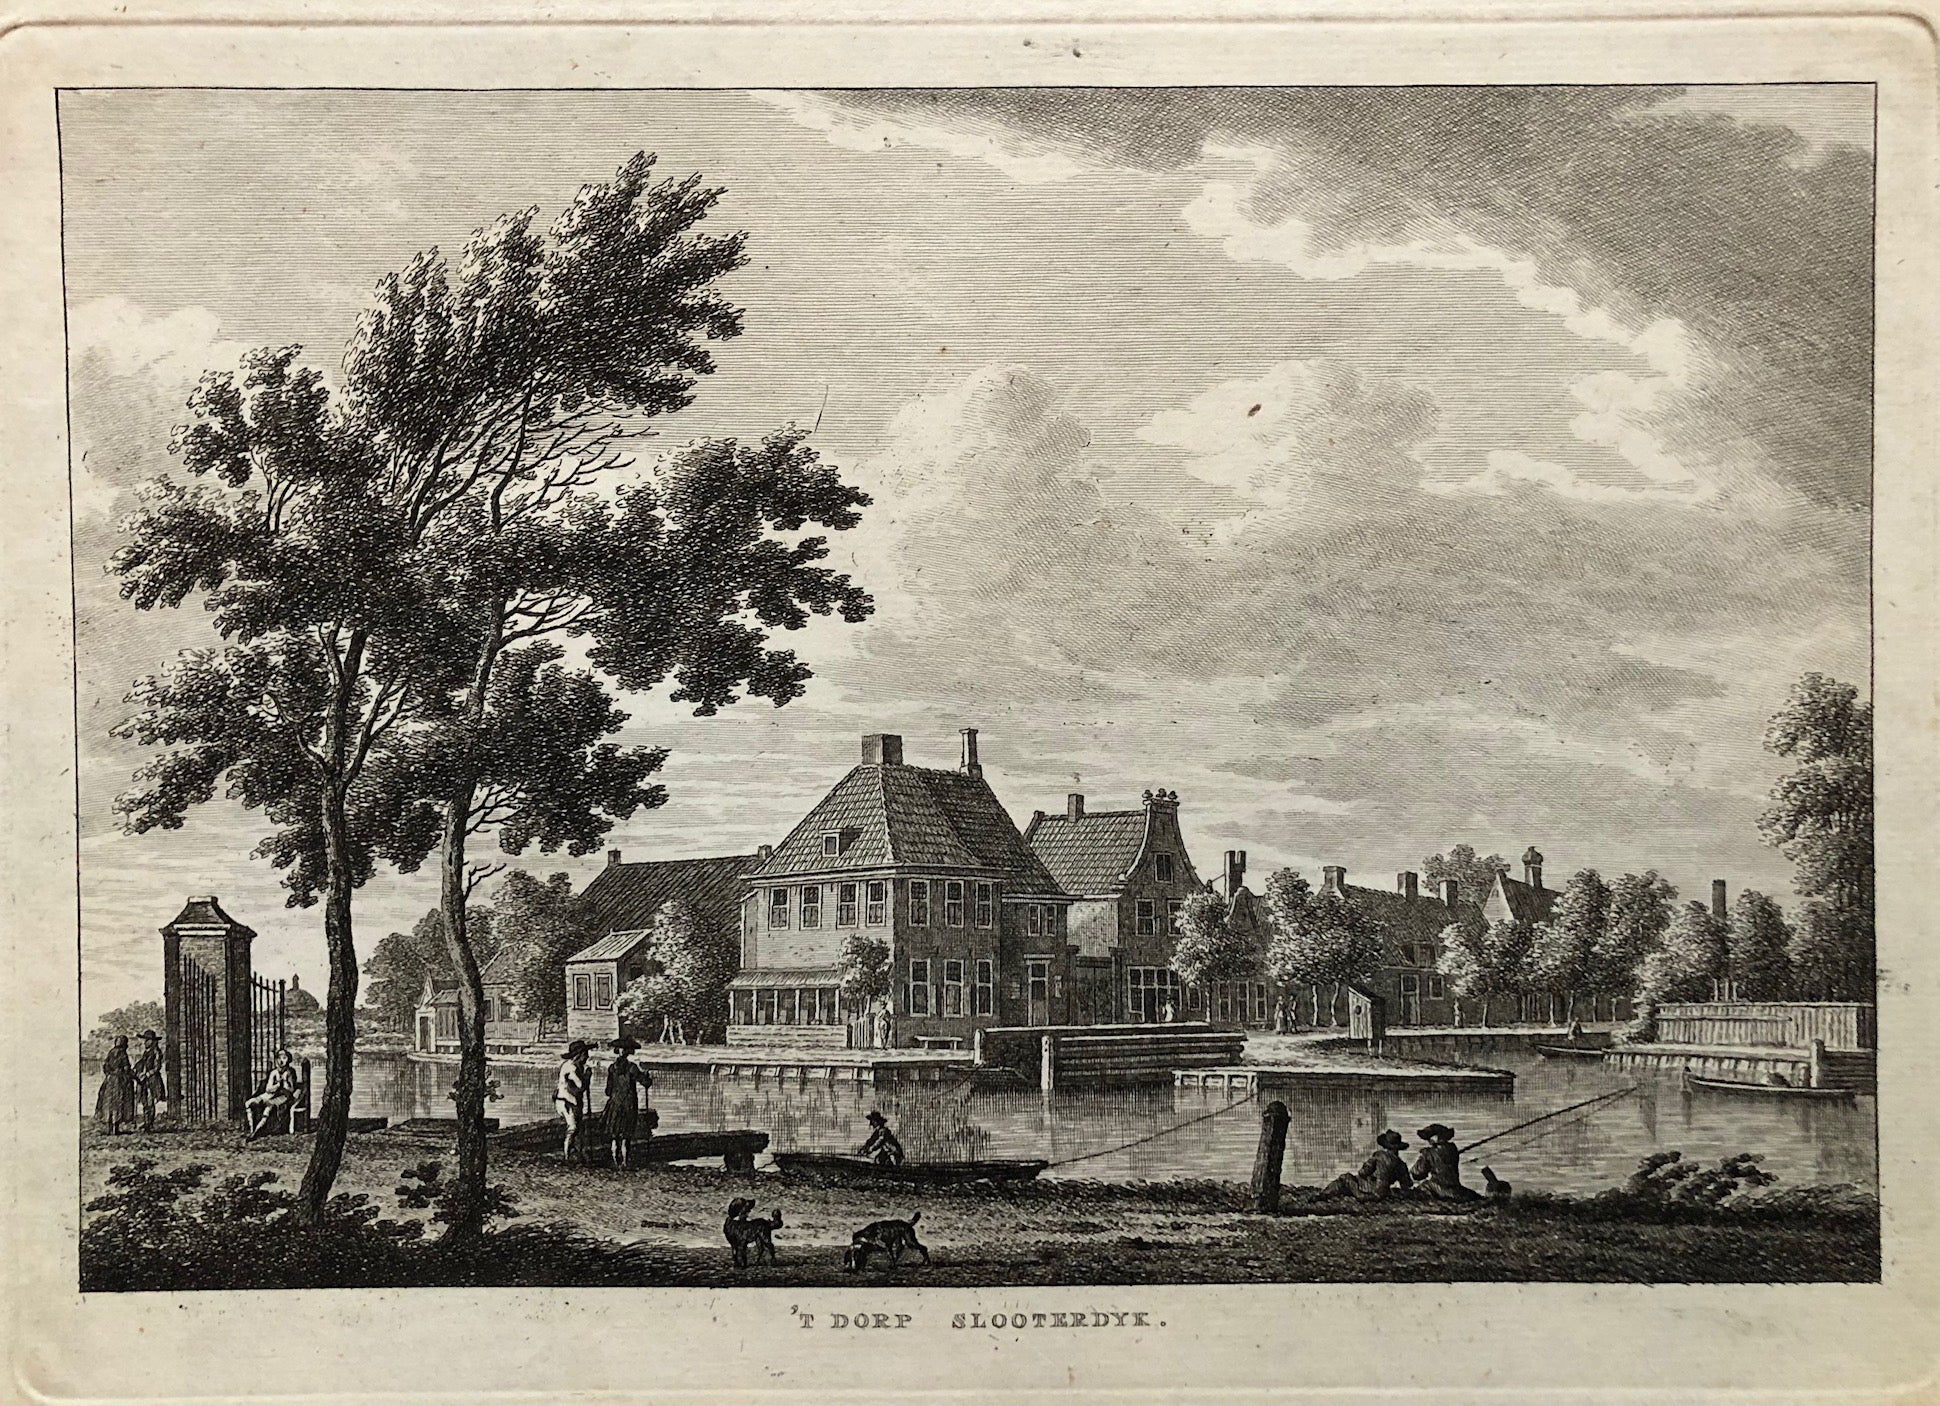  't Dorp Slooterdyk' . Nice engraving by Bendorp after J. Bulthuis from 1763 of this small village just outside of Amsterdam.